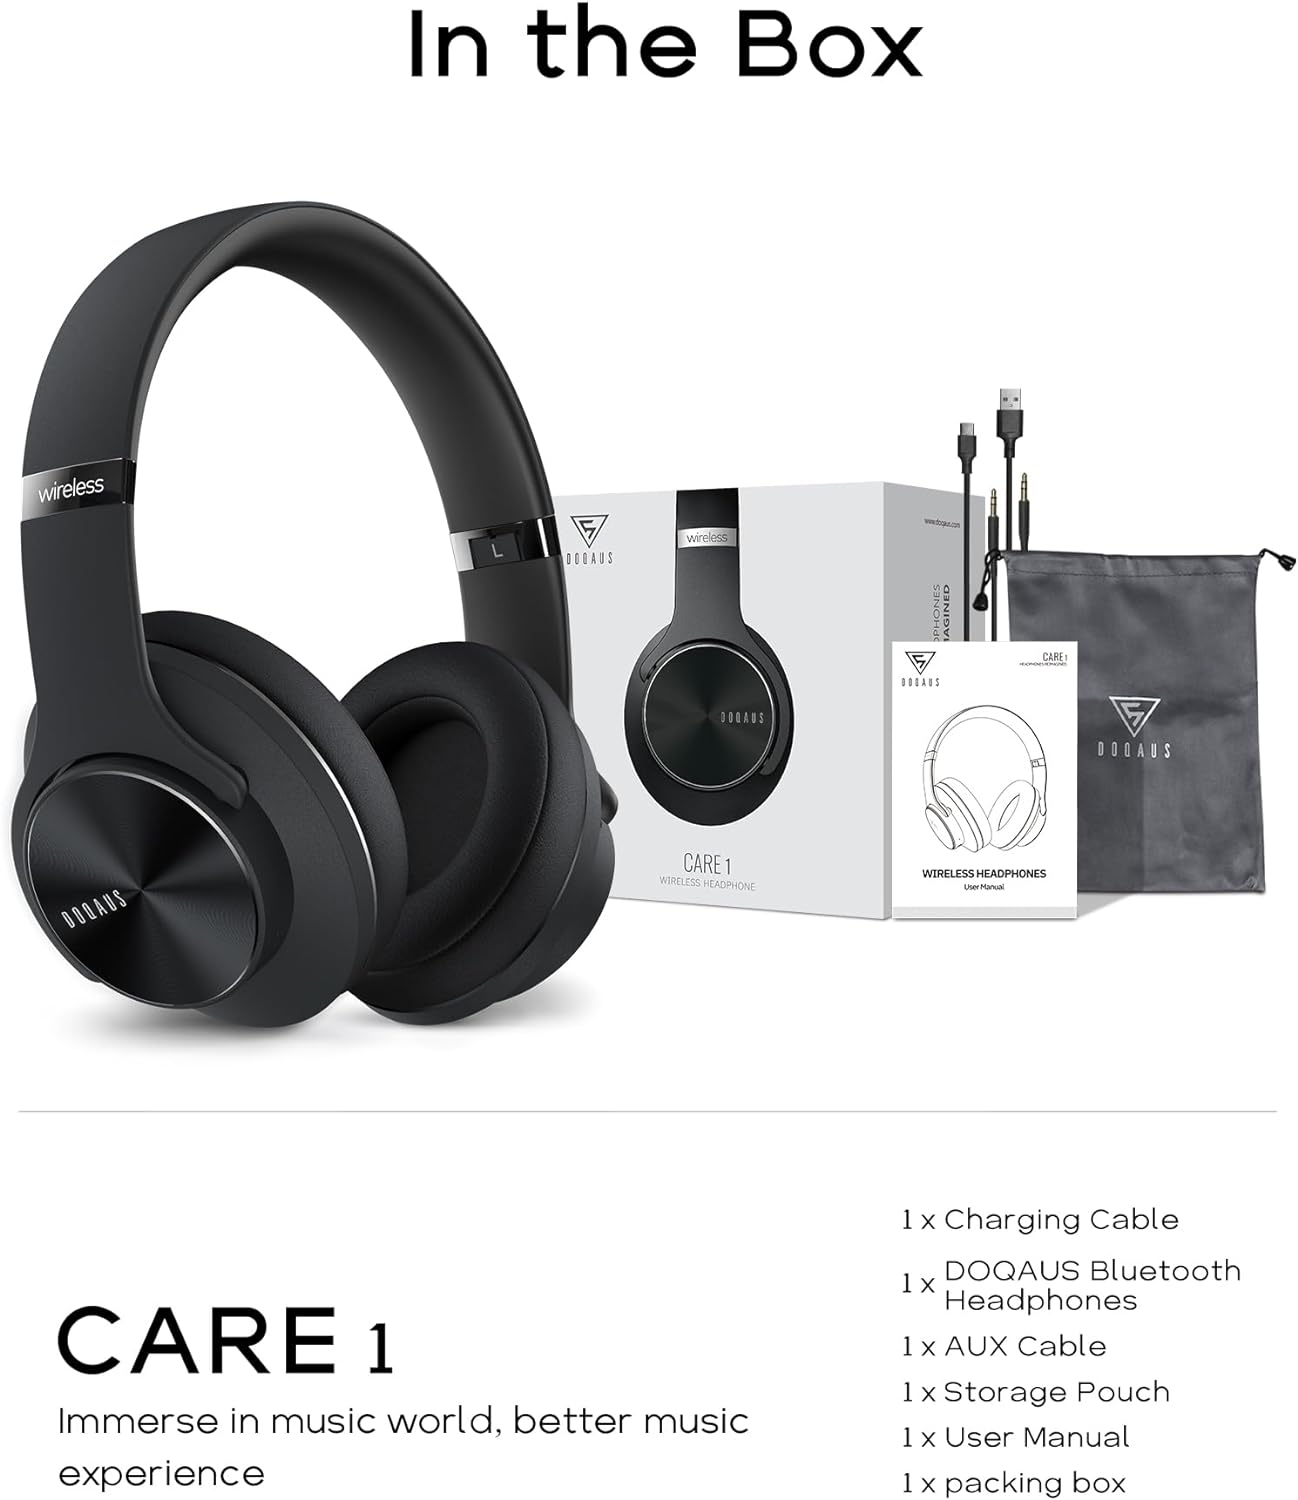 DOQAUS Bluetooth Headphones Over Ear, 52 Hrs Playtime, Wireless Headphones with 3 EQ Modes, Foldable Hi-Fi Stereo Bass Headphones, Soft Over Ear Headphones, Wired Mode, Built-in Mic for Phone/PC(Grey